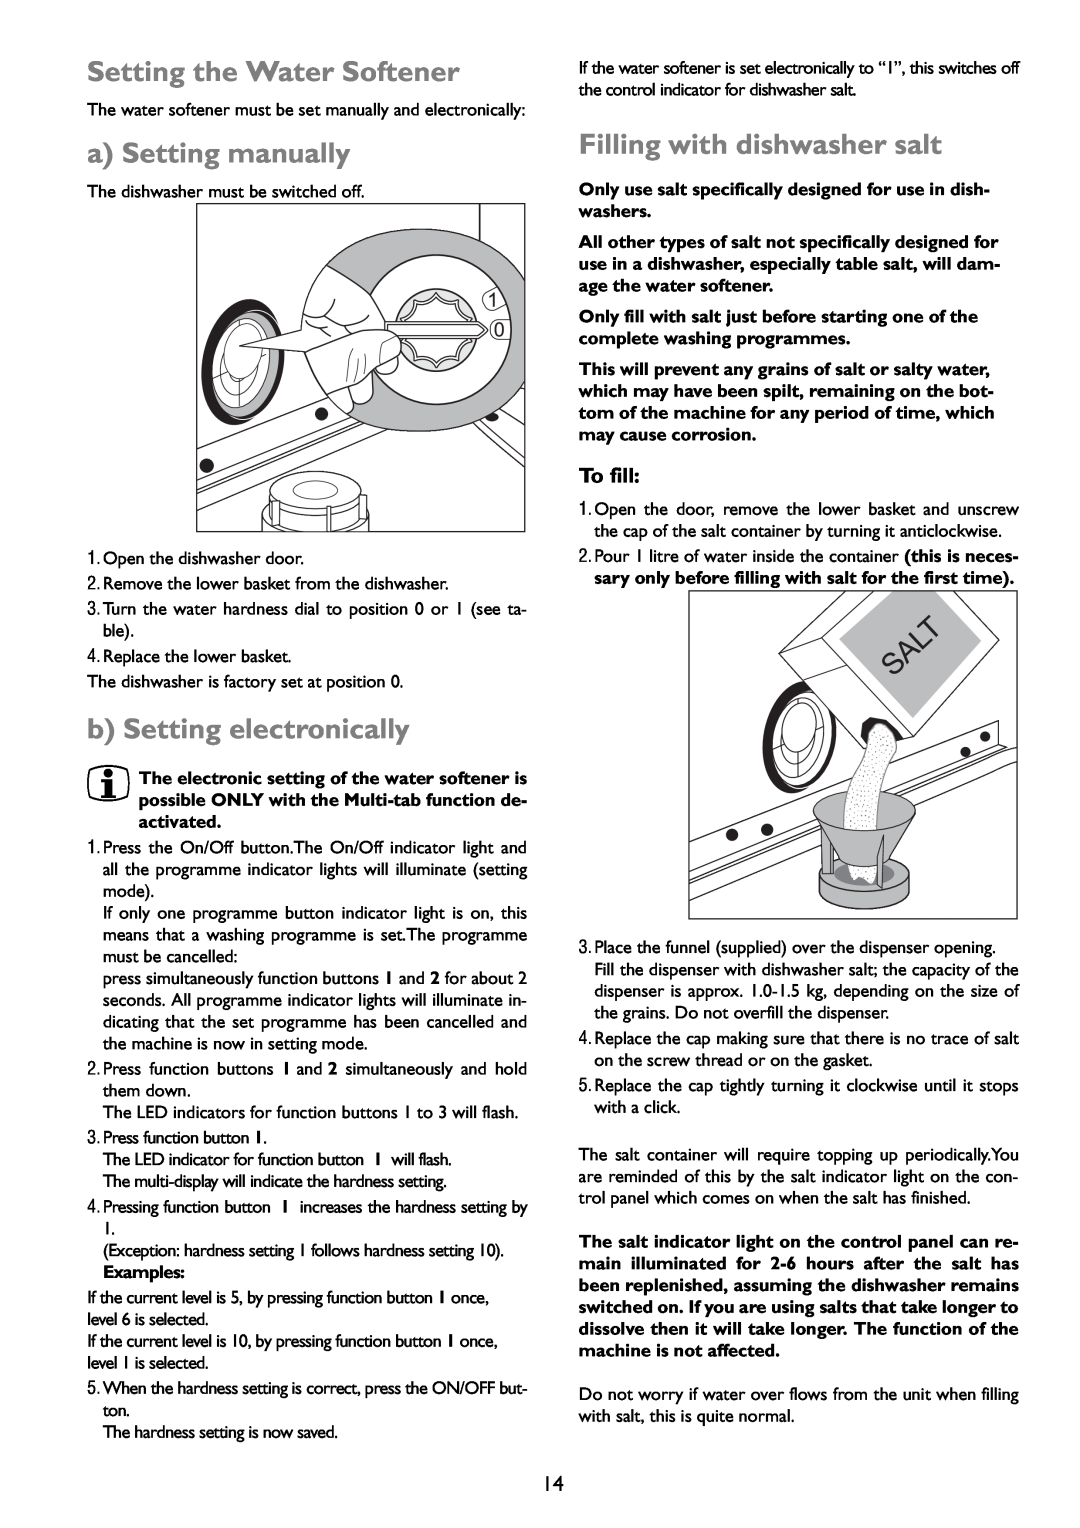 John Lewis JLDWW 1203 instruction manual Setting the Water Softener, a Setting manually, b Setting electronically, To fill 